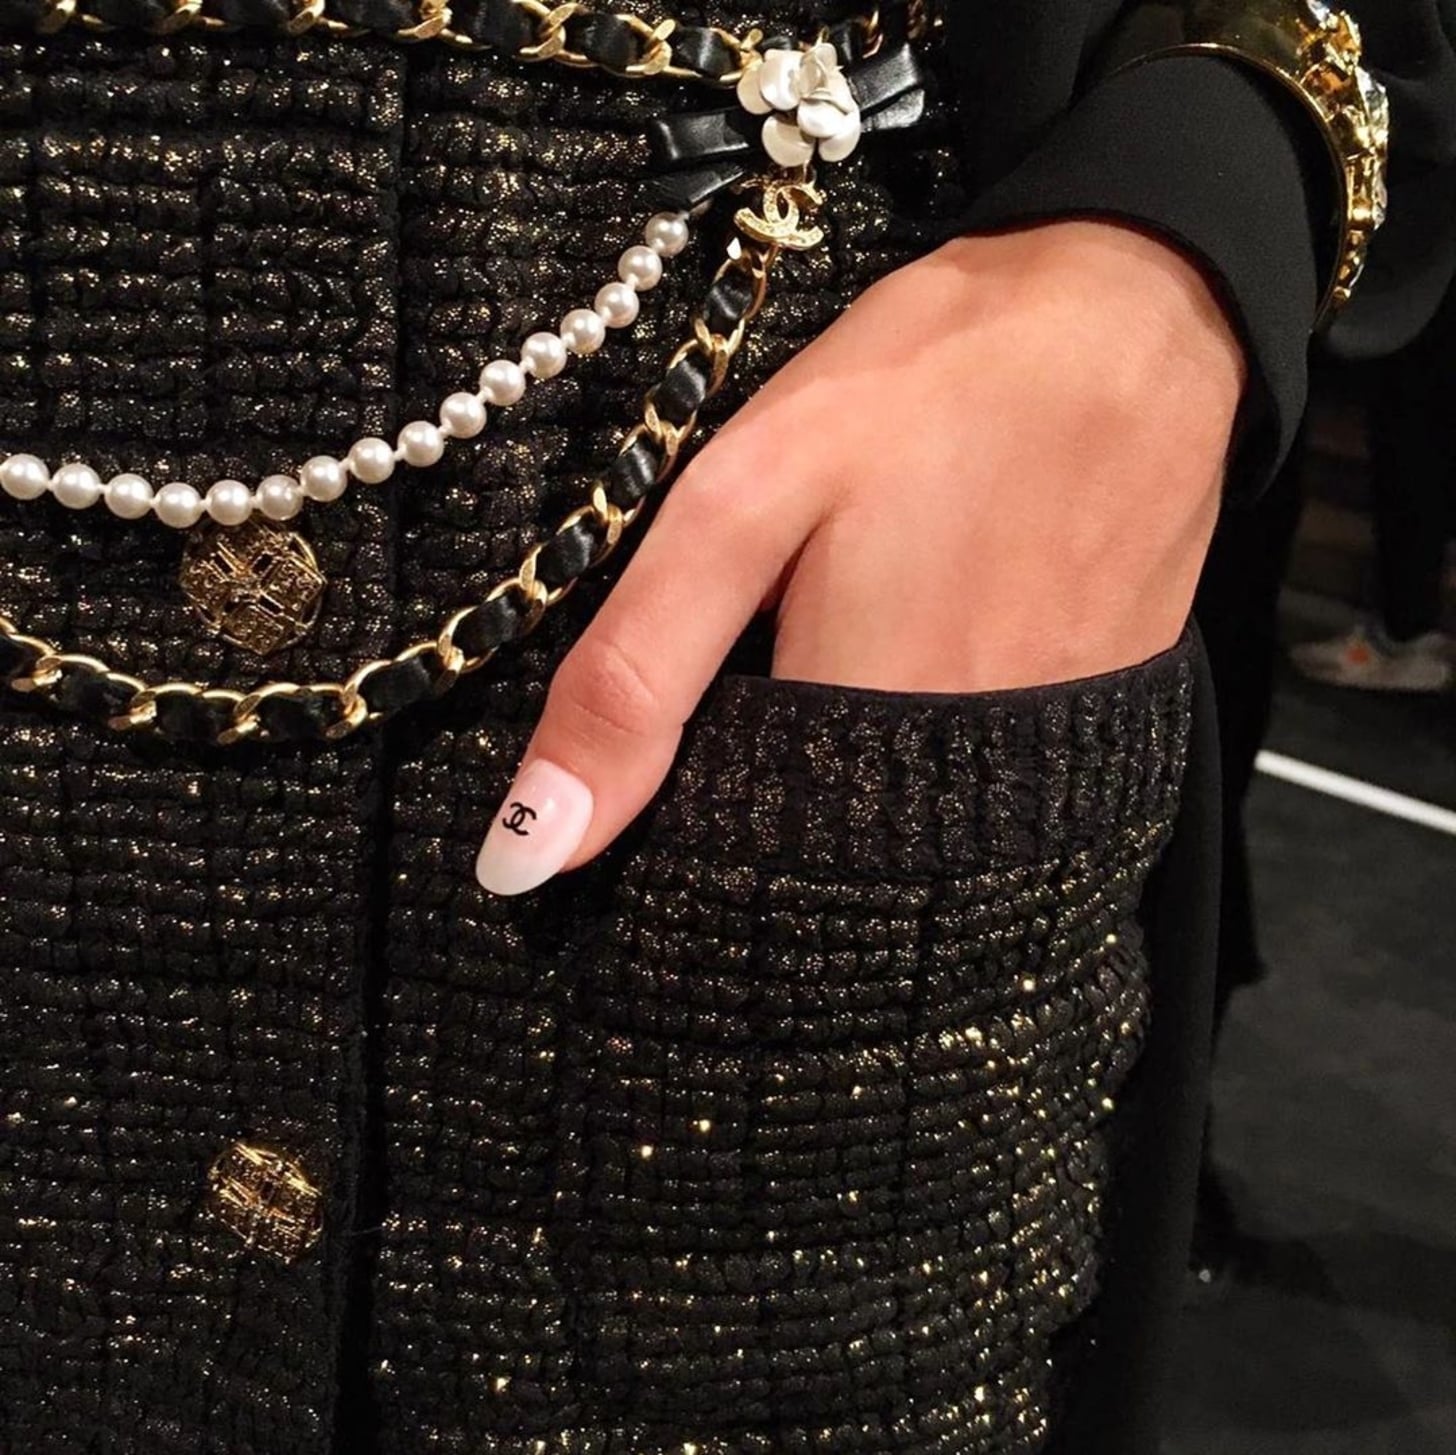 On main street and the runway, nail art is the new lipstick